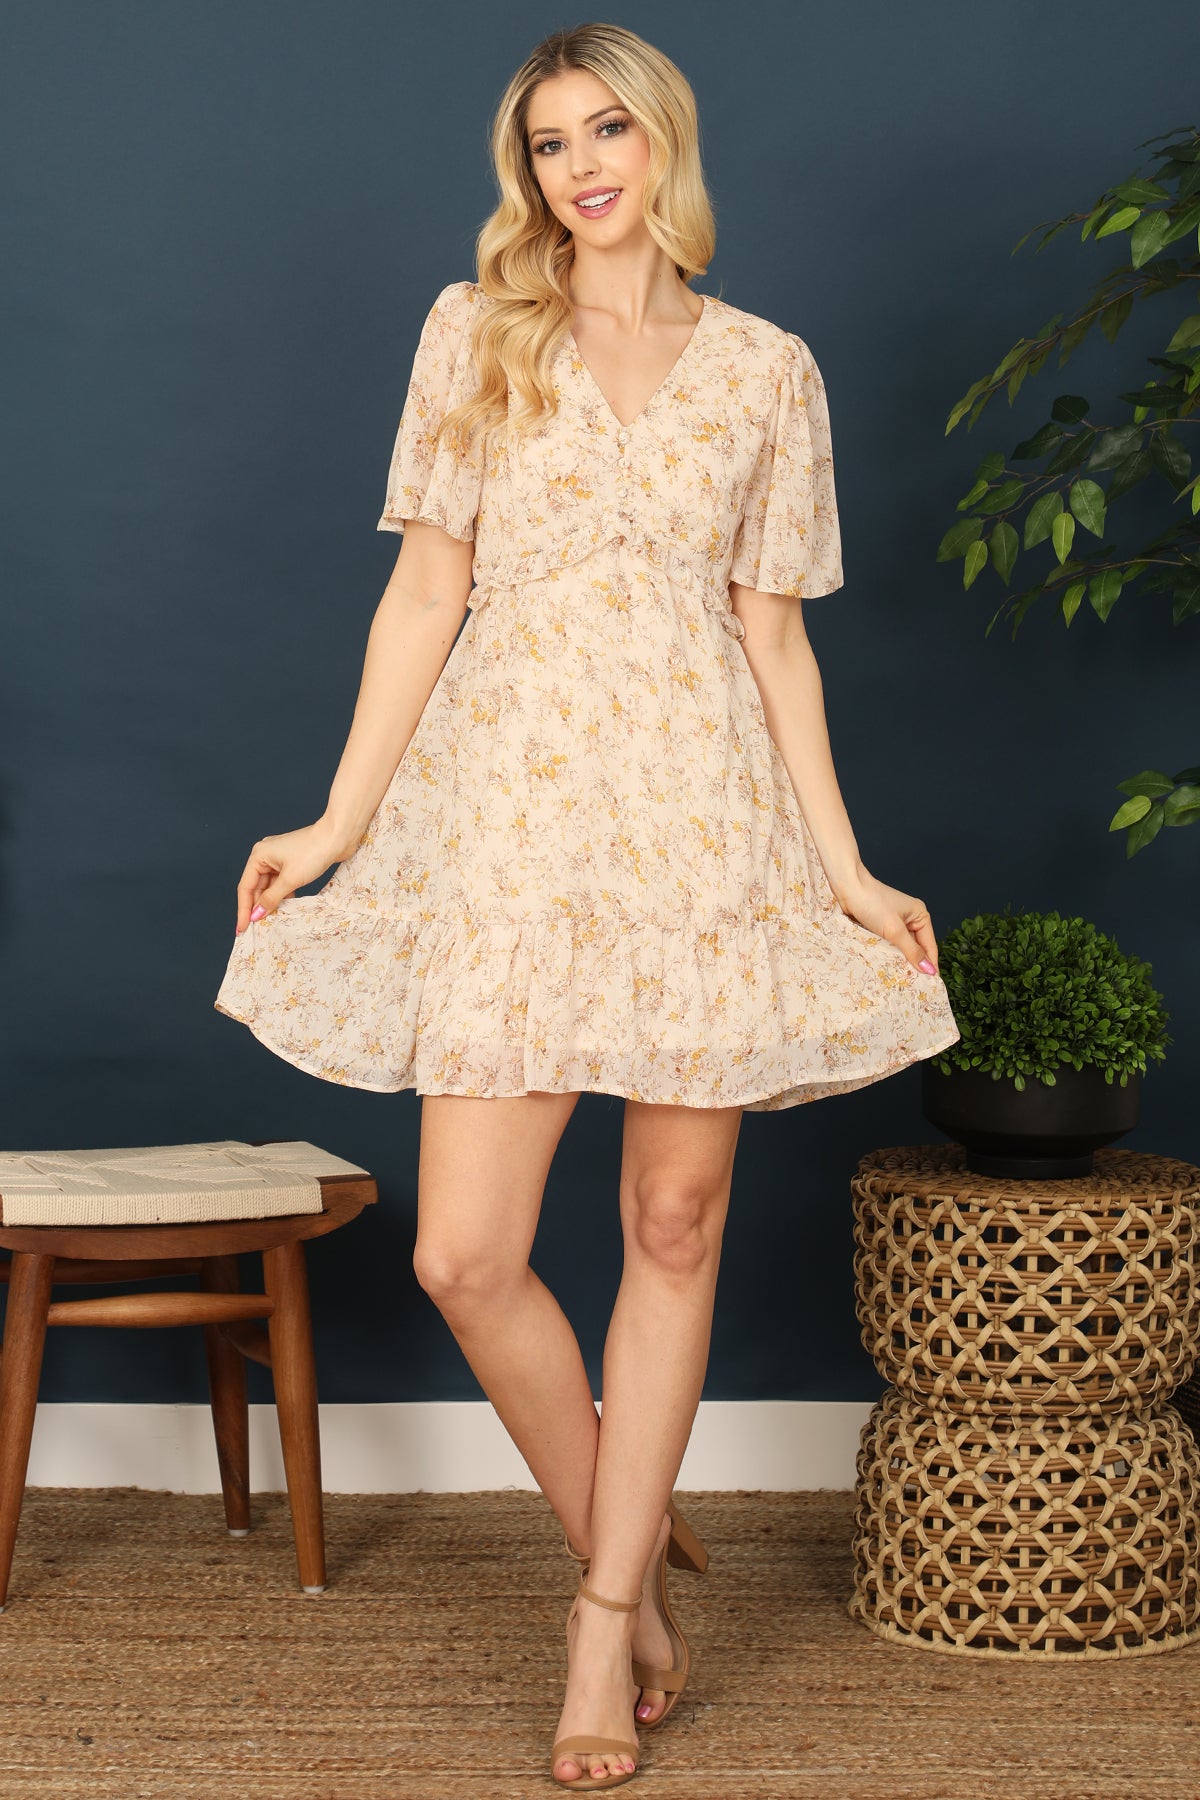 V-NECK BELL SLEEVE RUFFLE DETAIL FLORAL DRESS 2-2-2 (NOW $6.75 ONLY!)